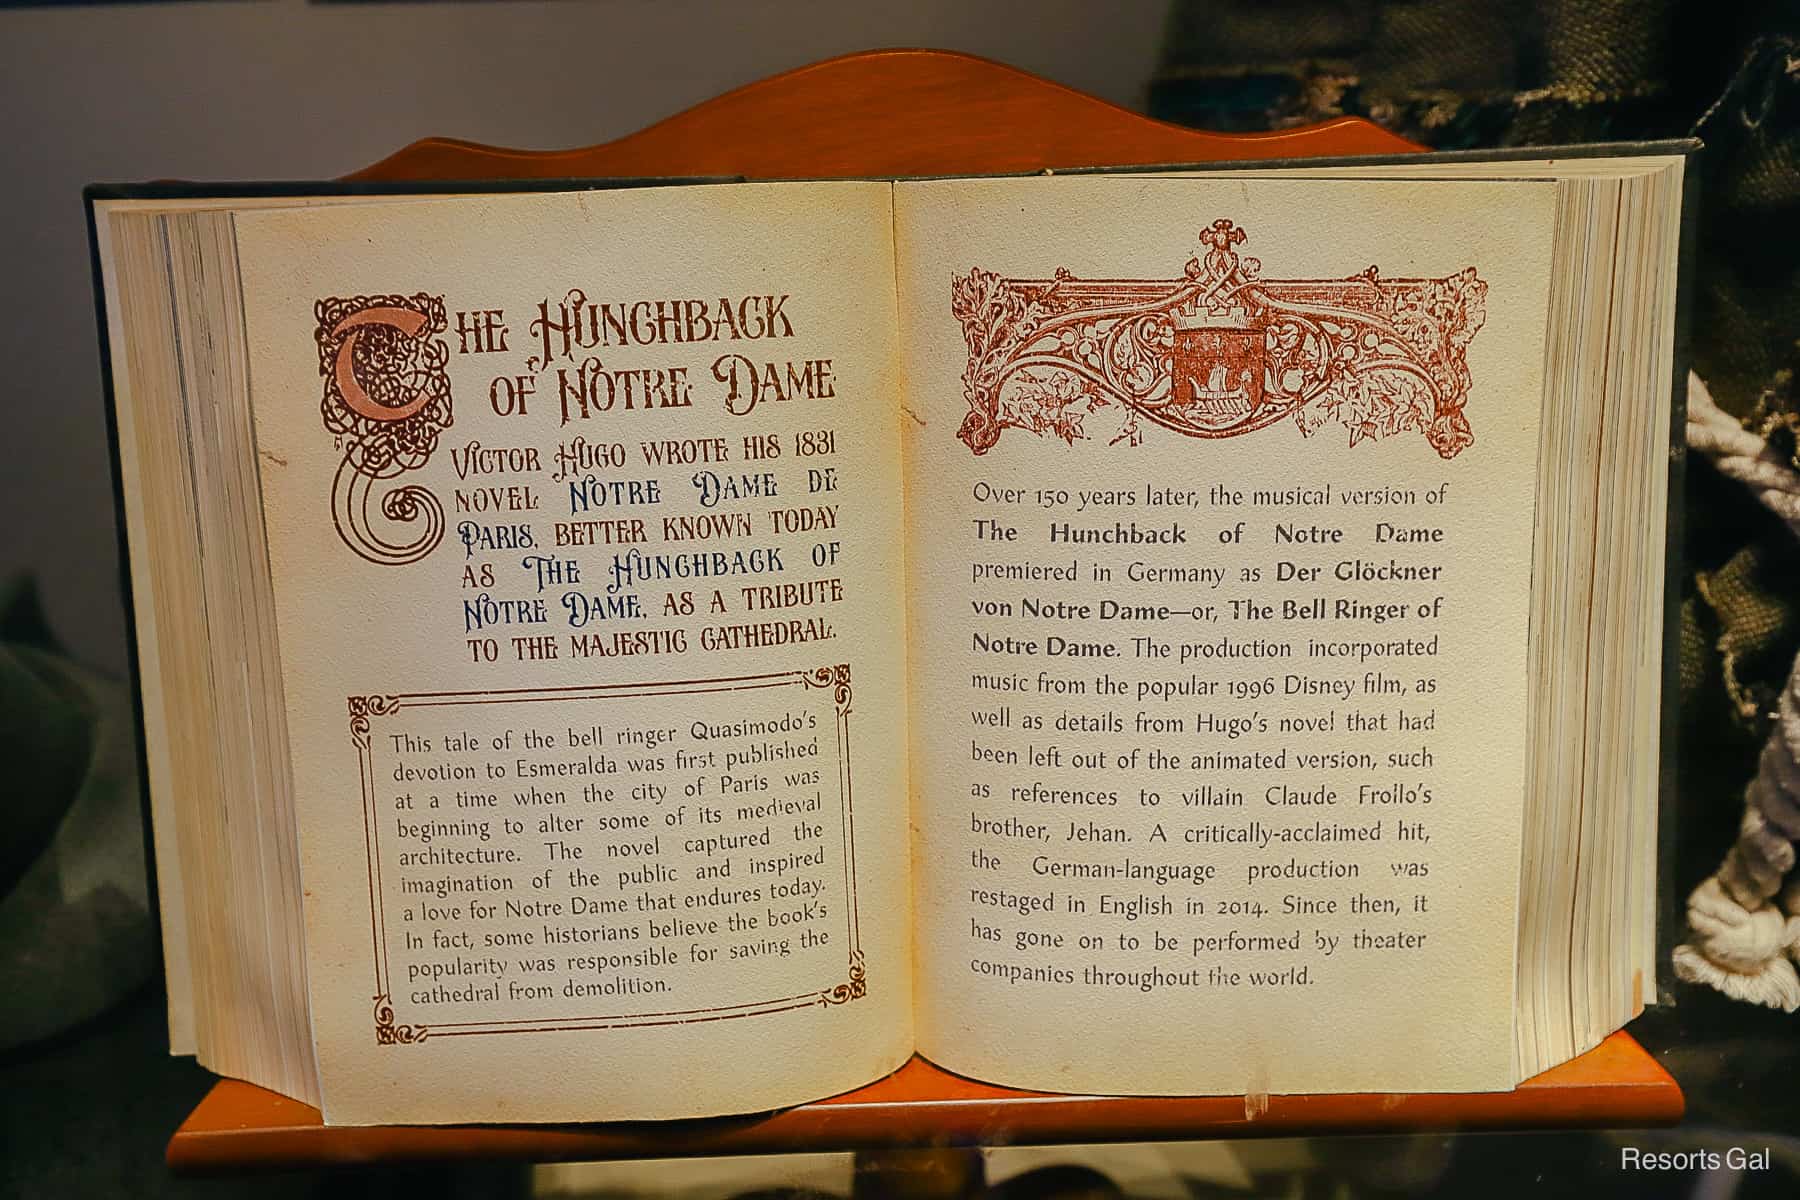 a book that's open showing information about The Hunchback of Notre Dame